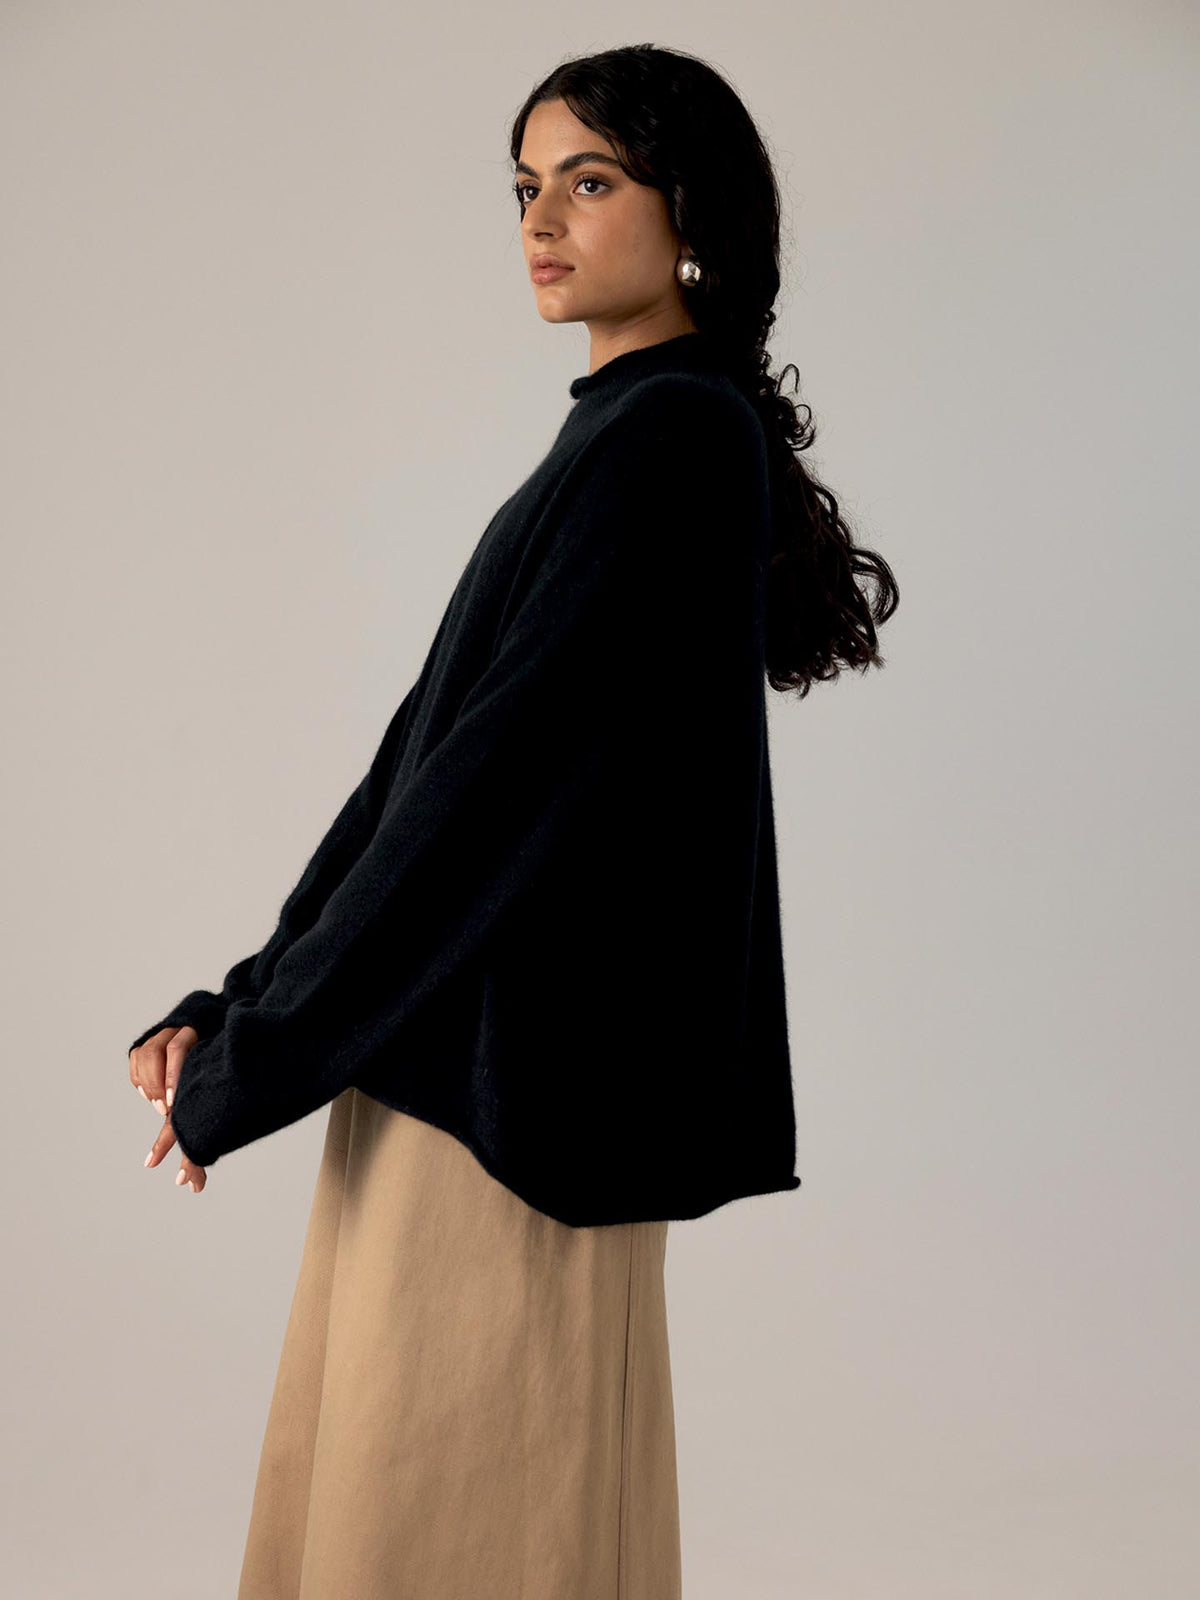 A woman in a relaxed fit Francie Eclipse Knit – Black sweater and beige skirt, standing in profile, looks over her shoulder against a neutral background.